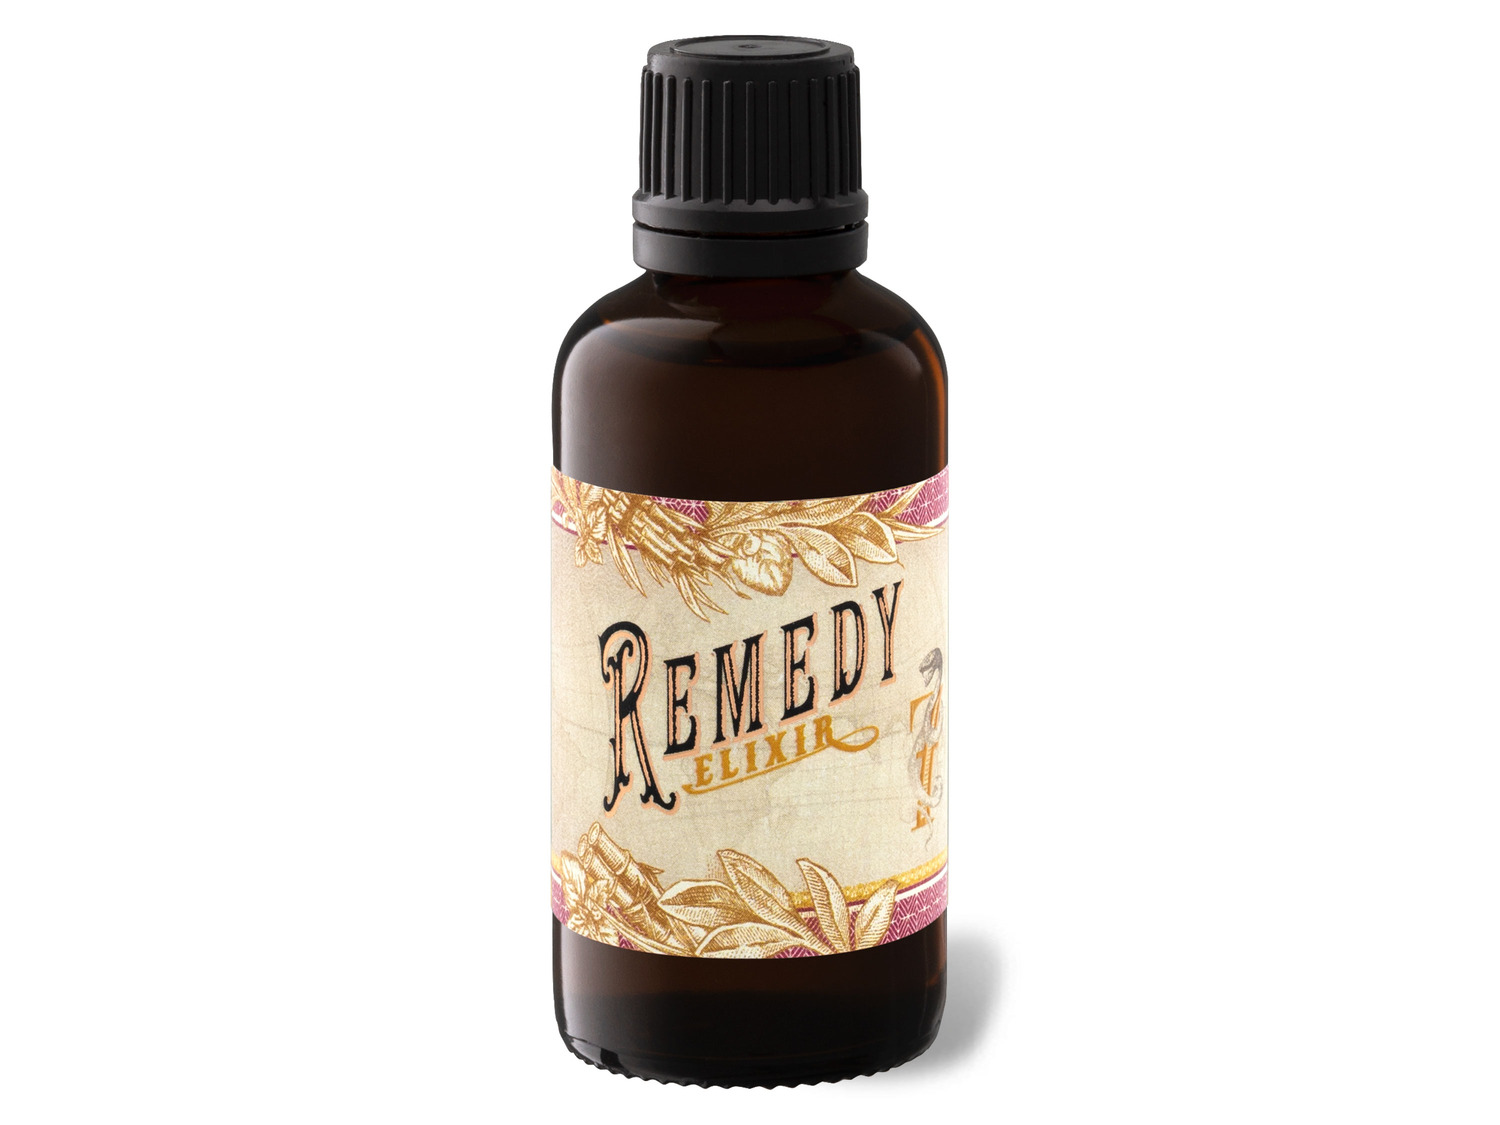 Remedy Spiced Rum 41,5% Vol Pineapple Remedy 40%… 5cl 